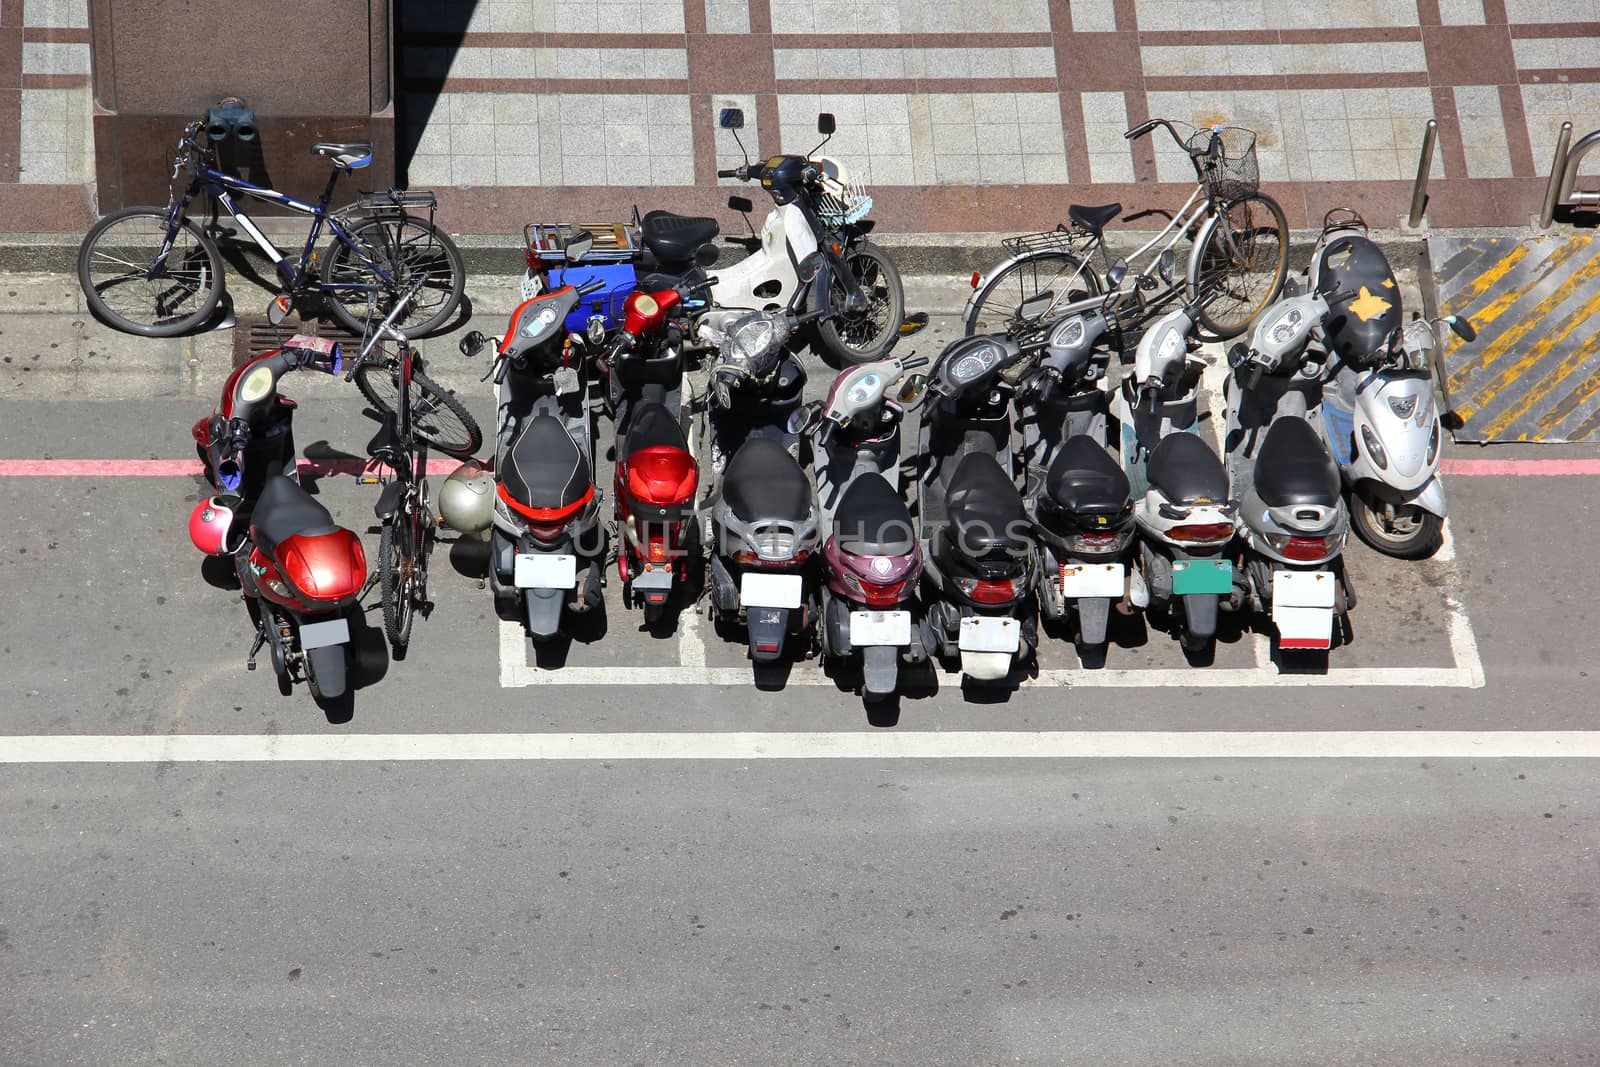 Top view motorcycle parking by liewluck